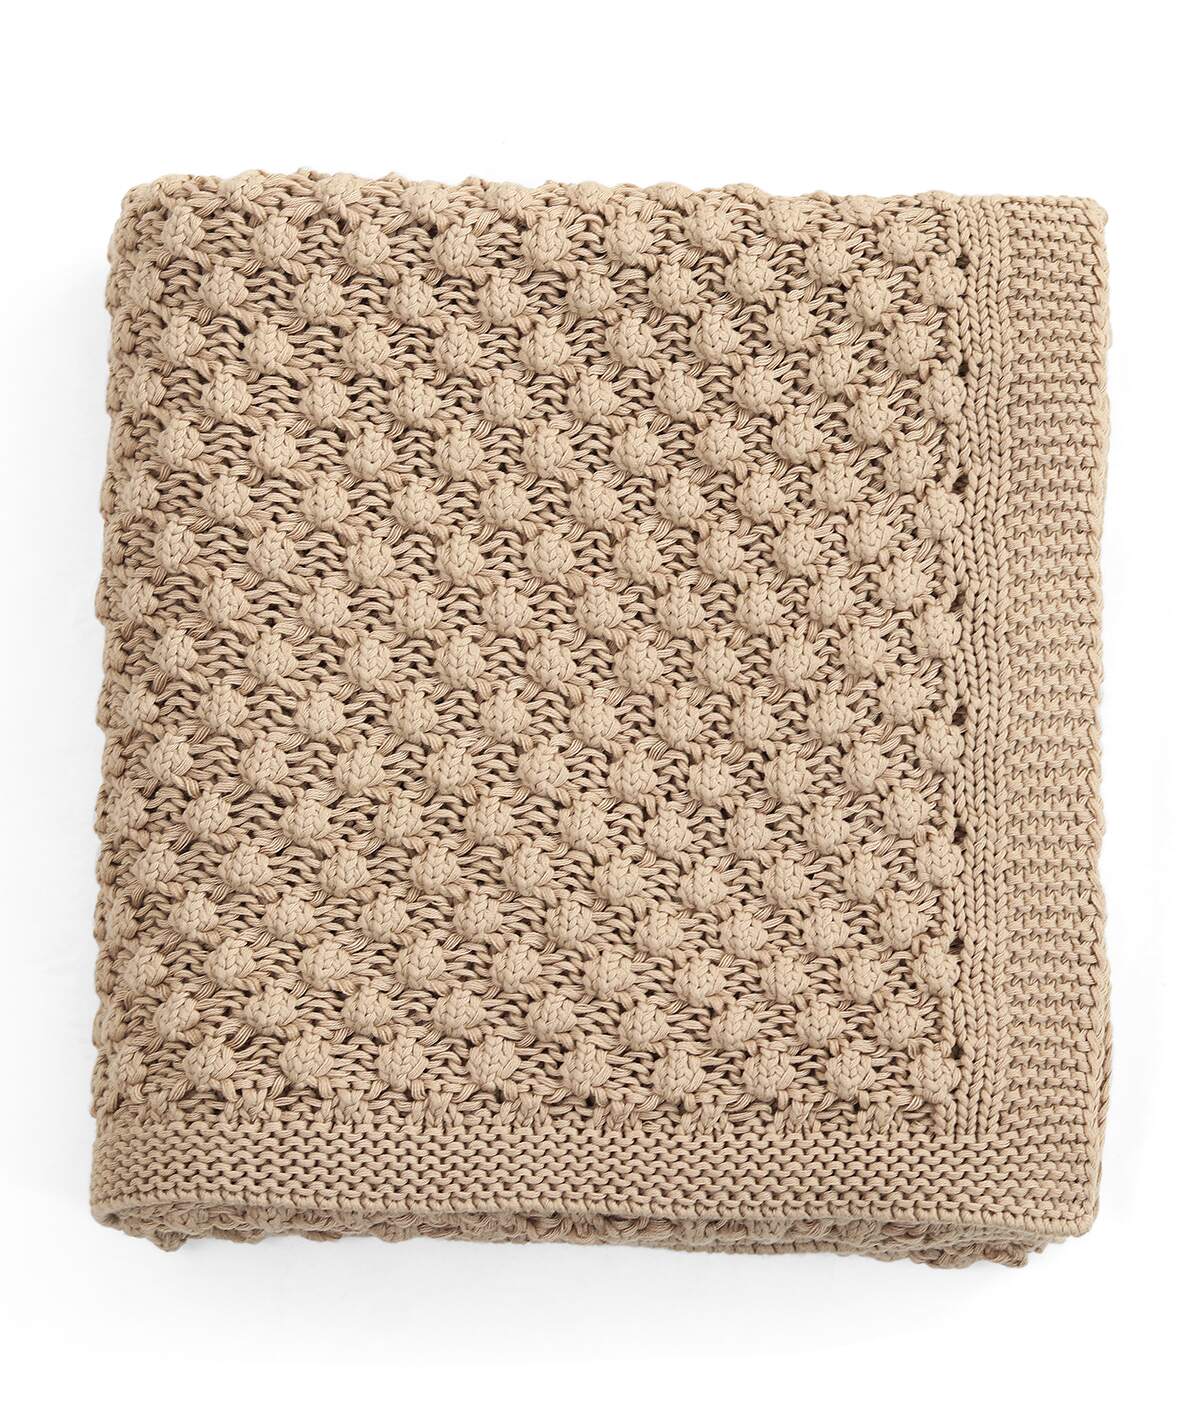 Popcorn Knit Linen Color Cotton Knitted Throw /Blanket  For Round The Year Use